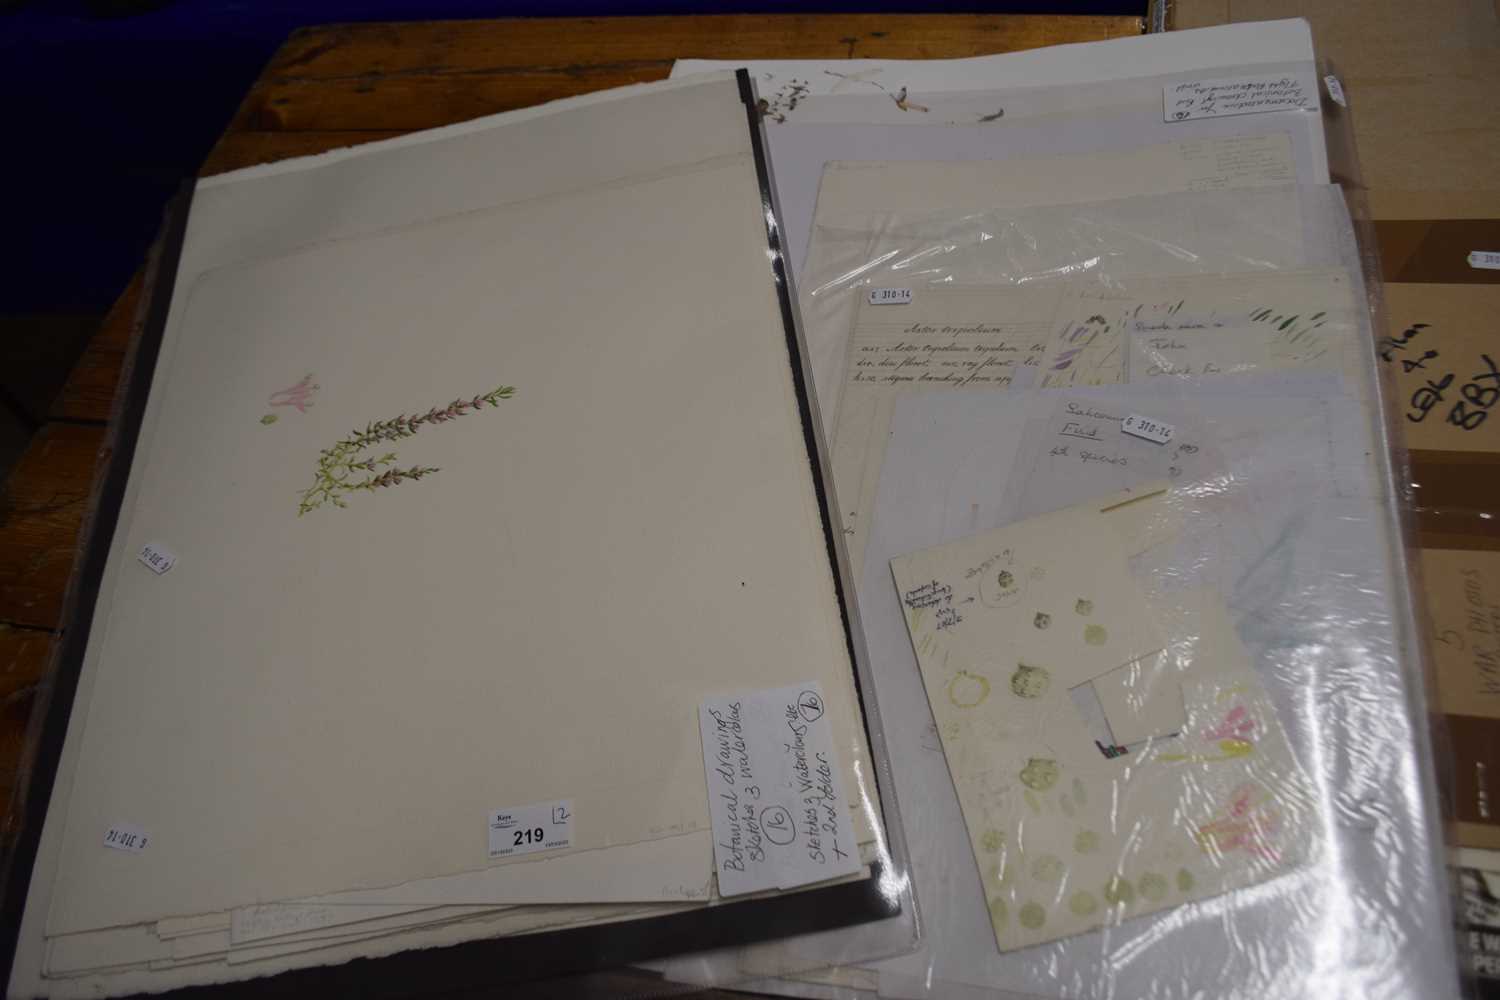 Two folders of various botanical drawings, flight map of birds of the world and other assorted